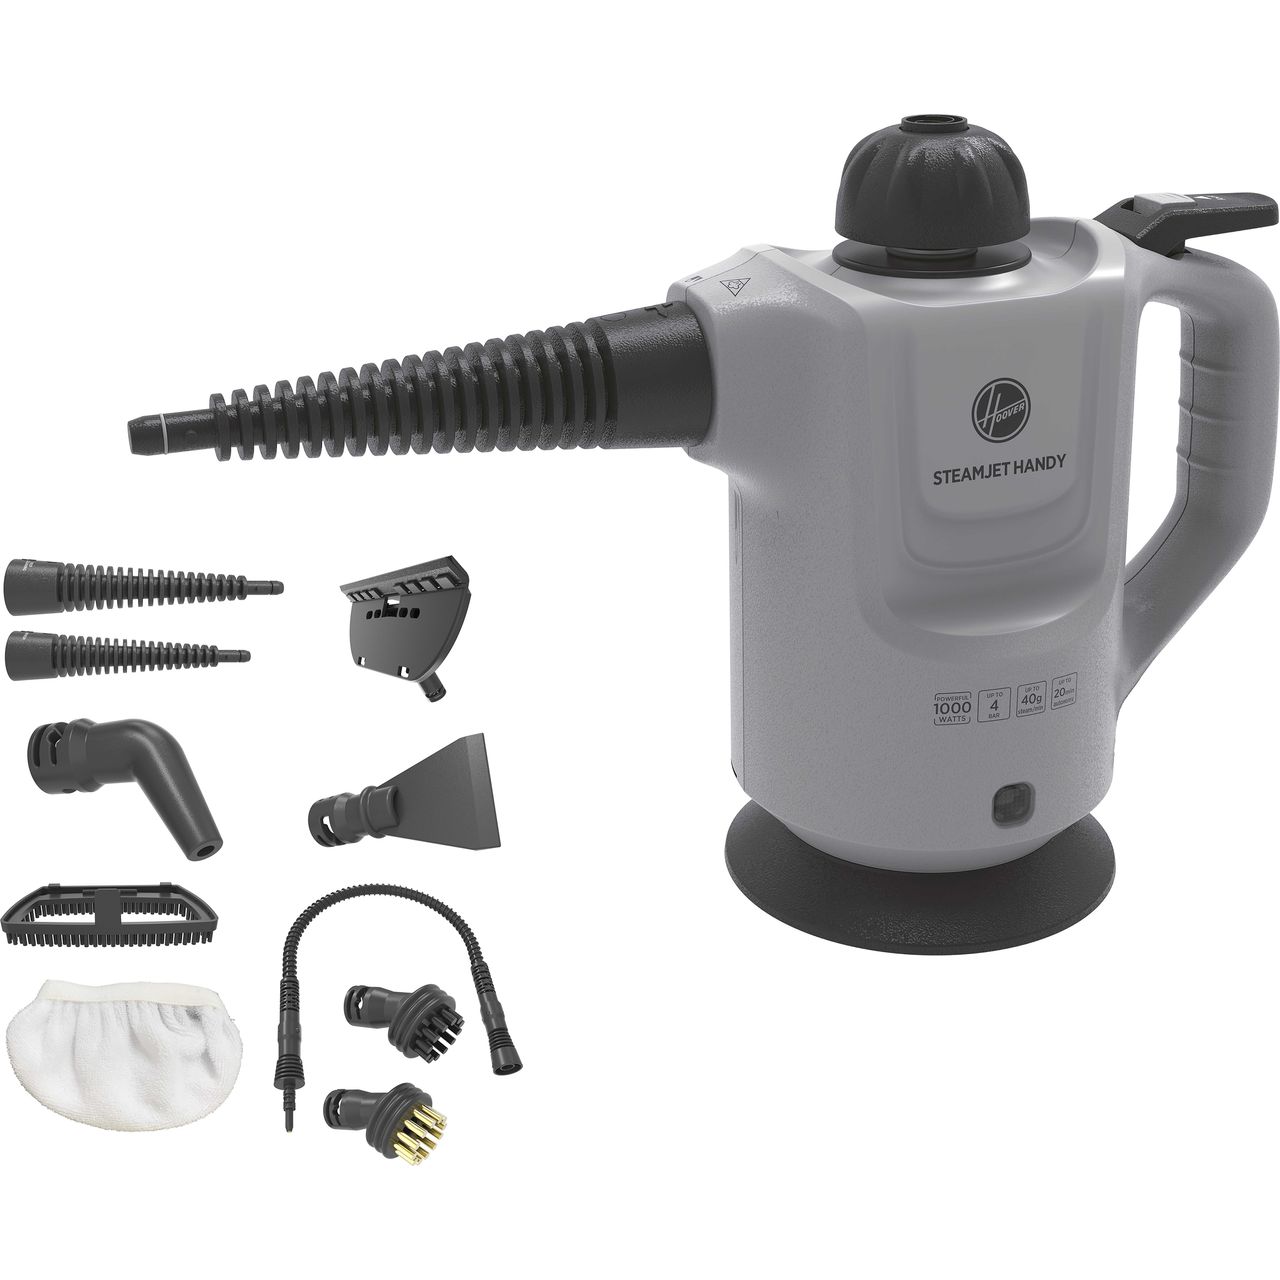 Hoover SteamJet Handy SGE1000 Steam Cleaner Review